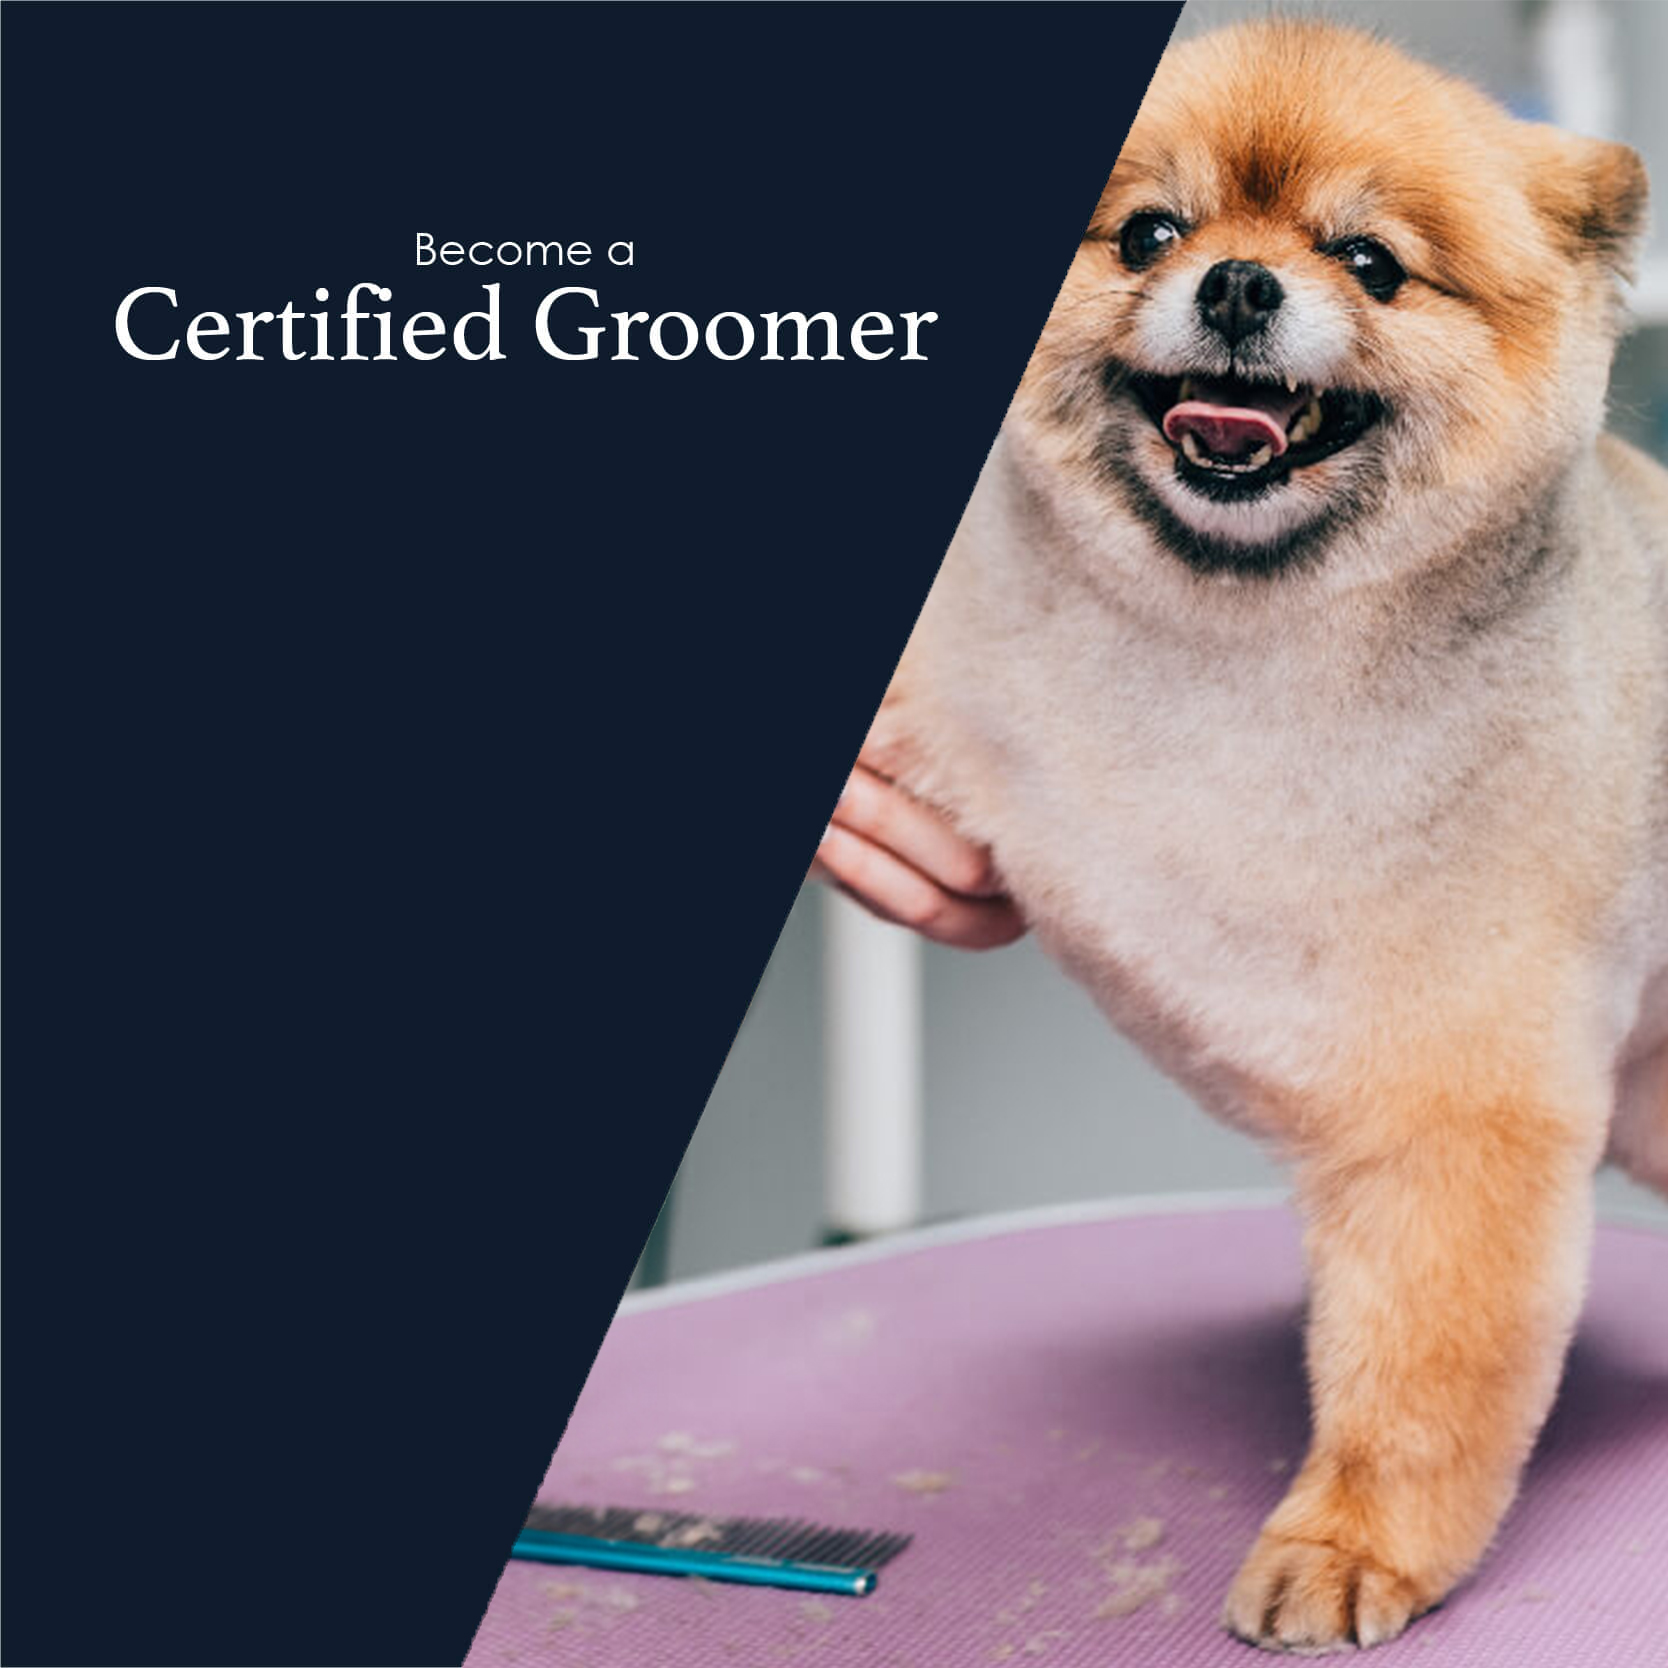 Become a Certified Groomer